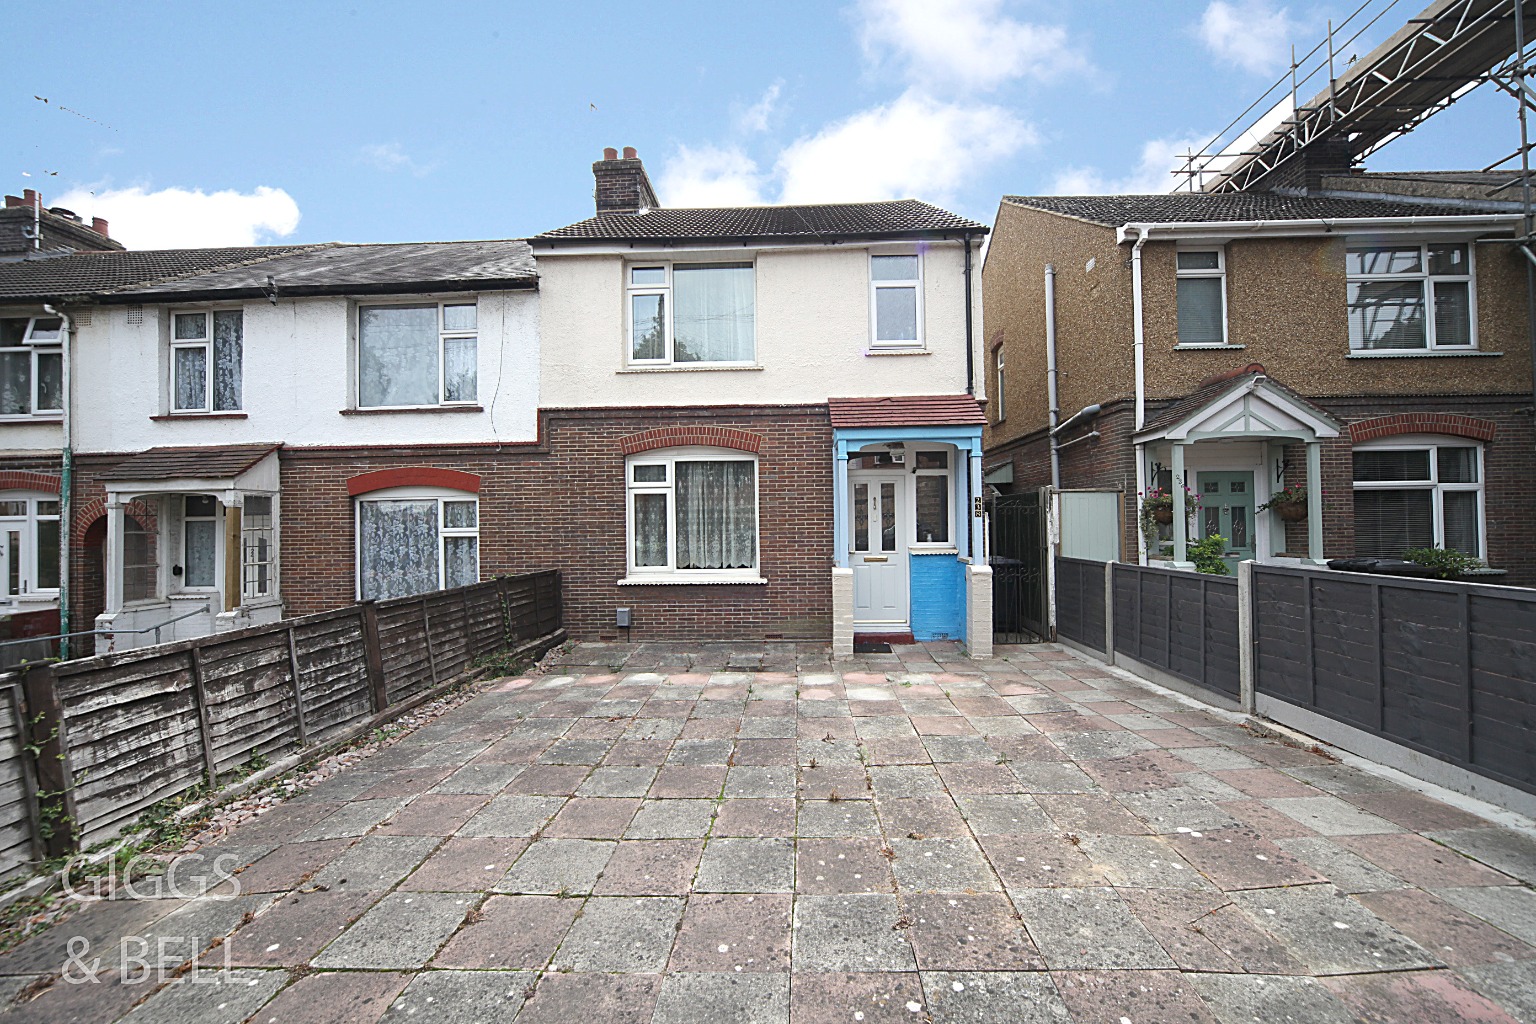 3 bed end of terrace house for sale in Crawley Green Road, Luton, LU2 